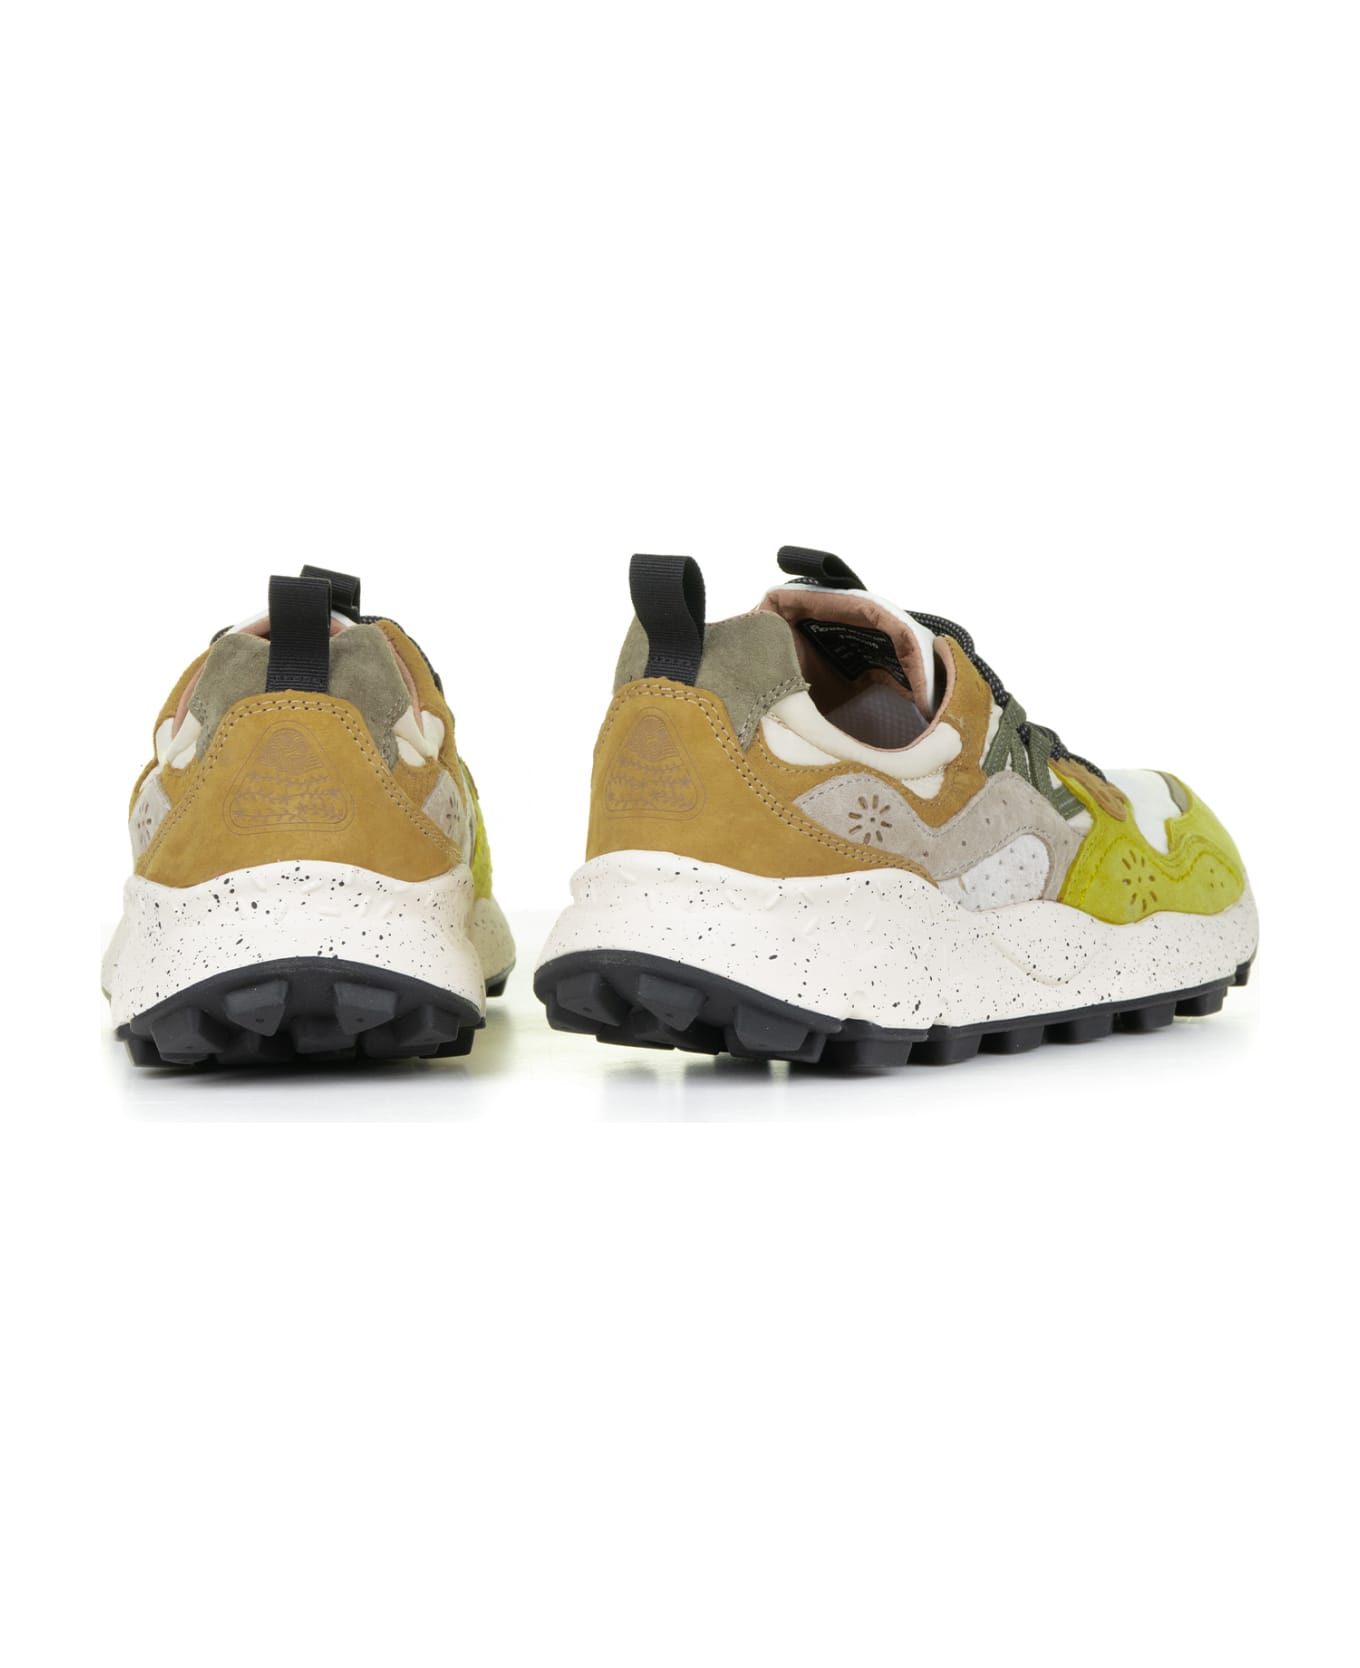 Flower Mountain Yamano Orca Sneakers In Suede And Nylon - OCHER WHITE